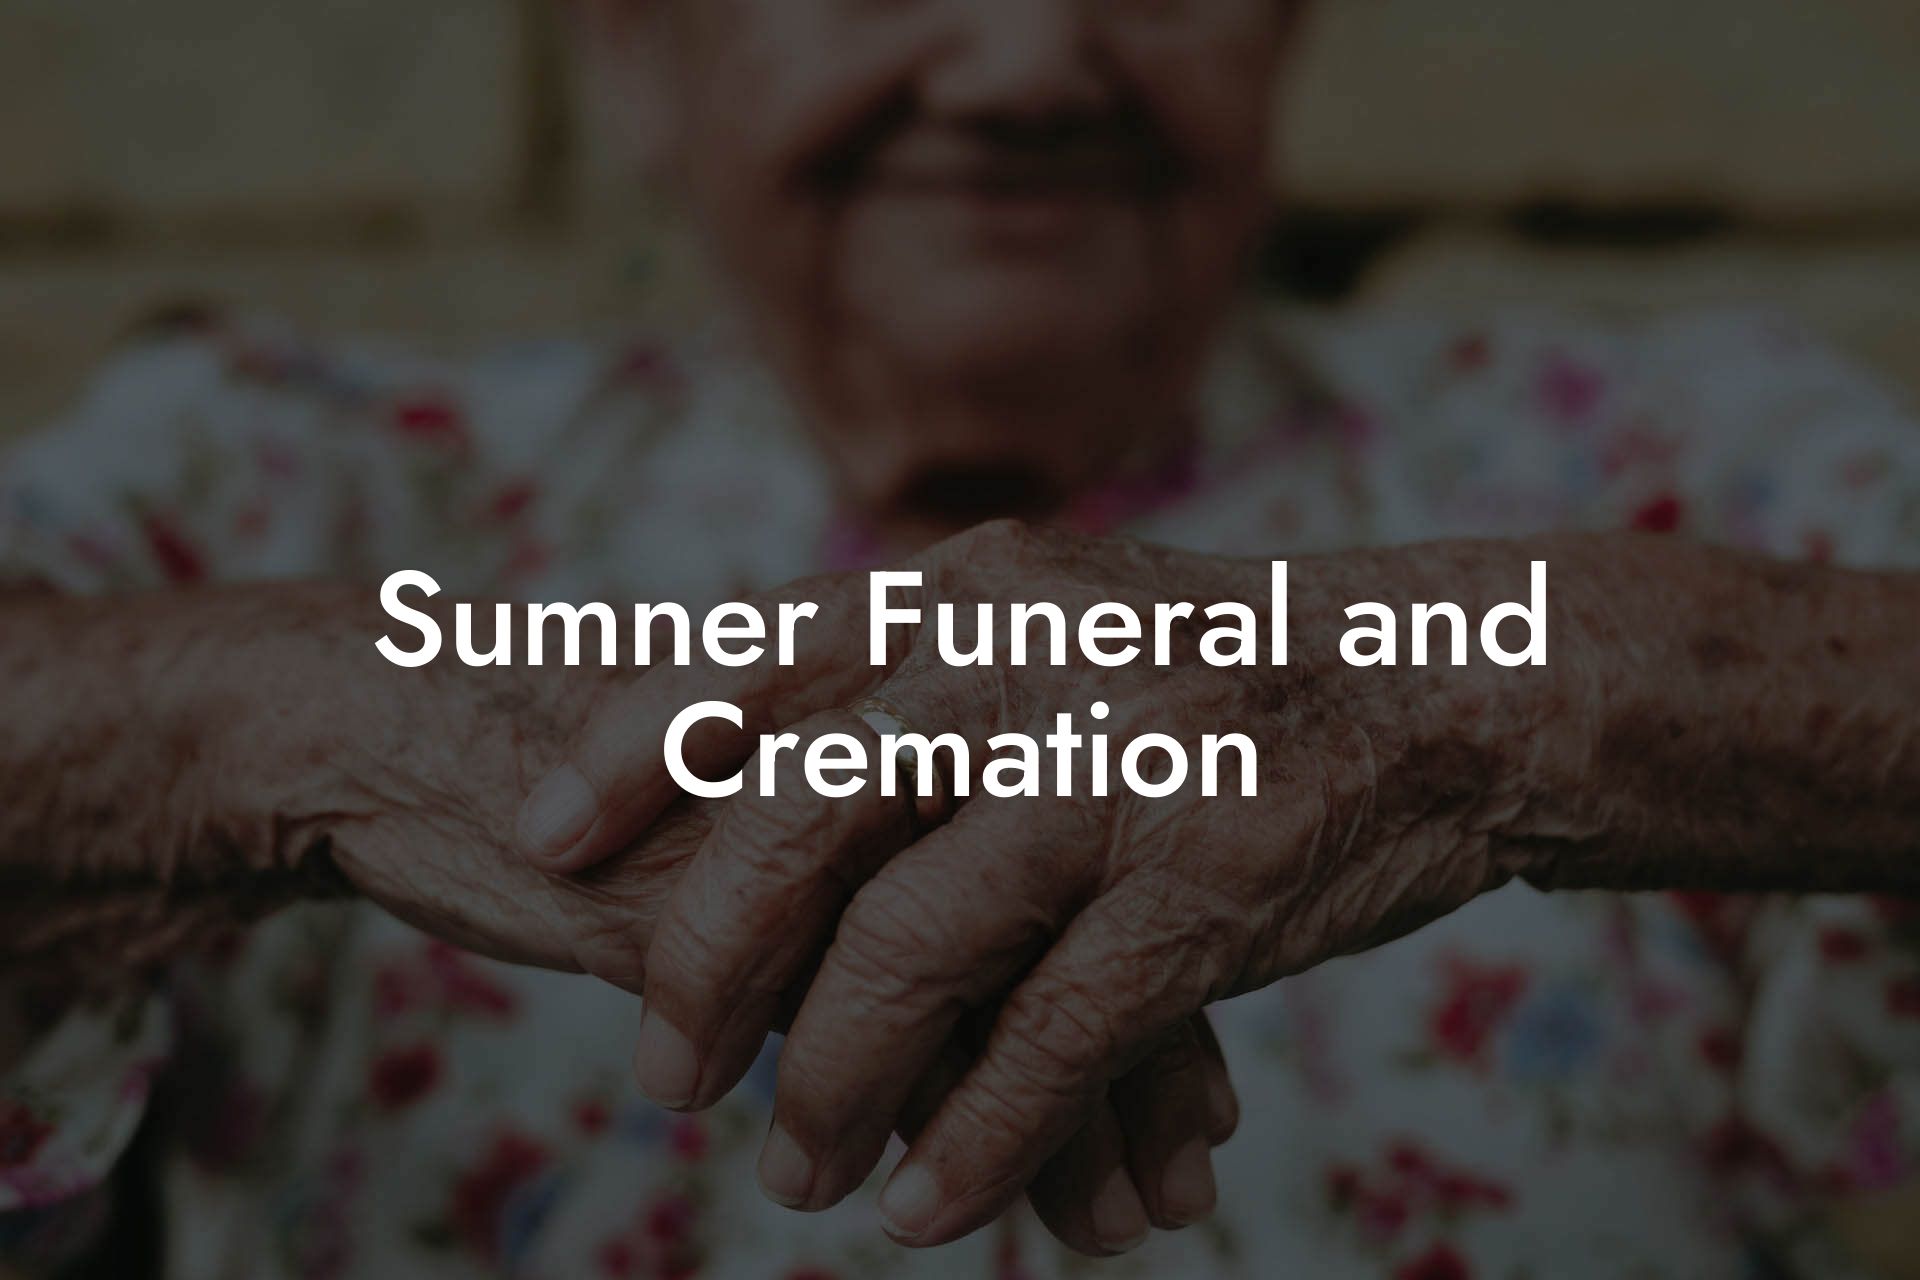 Sumner Funeral and Cremation